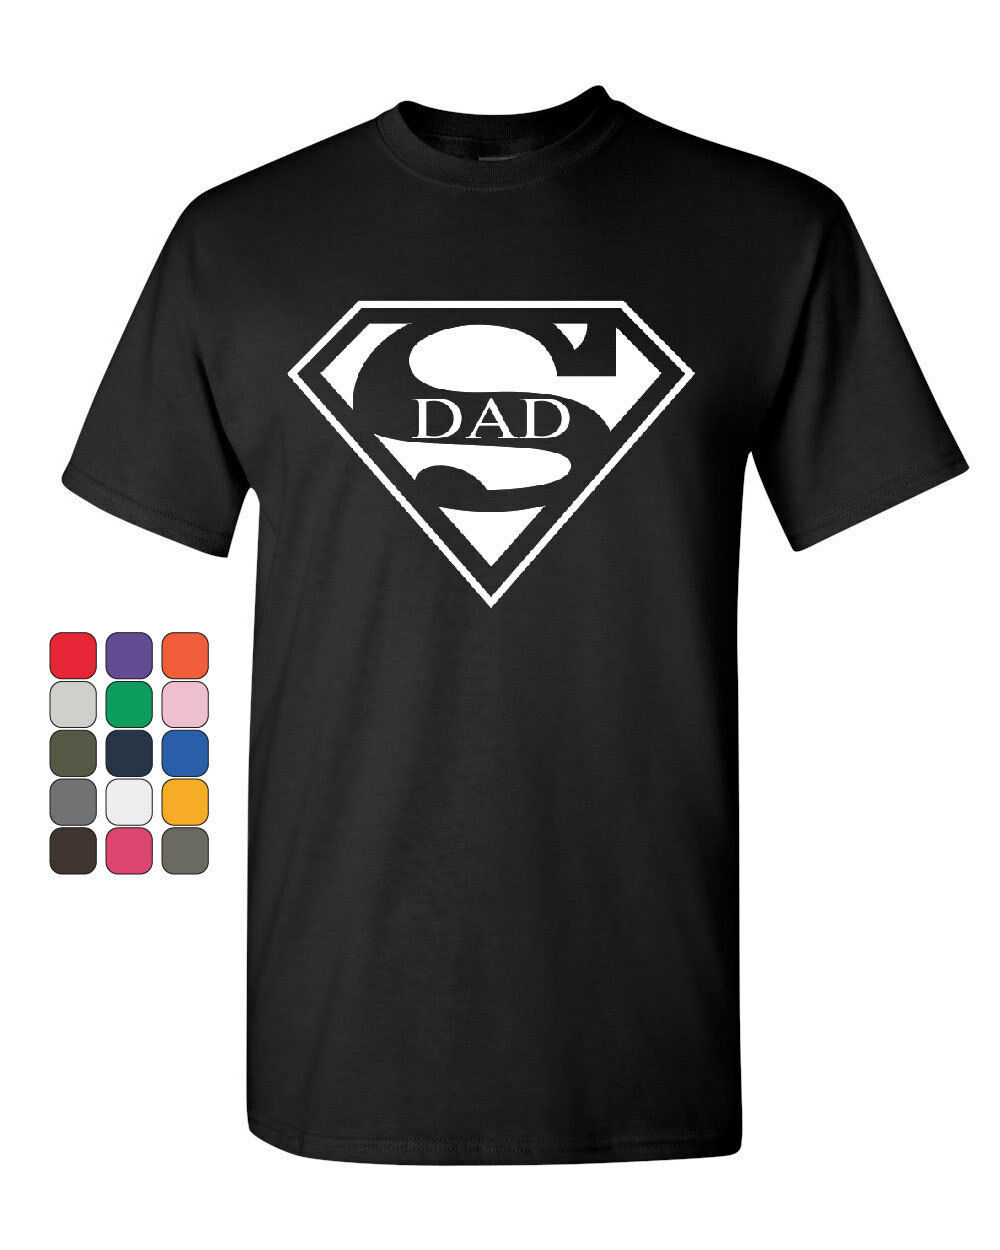 Super Dad T-Shirt Funny Superhero Father's Day Tee Shirt